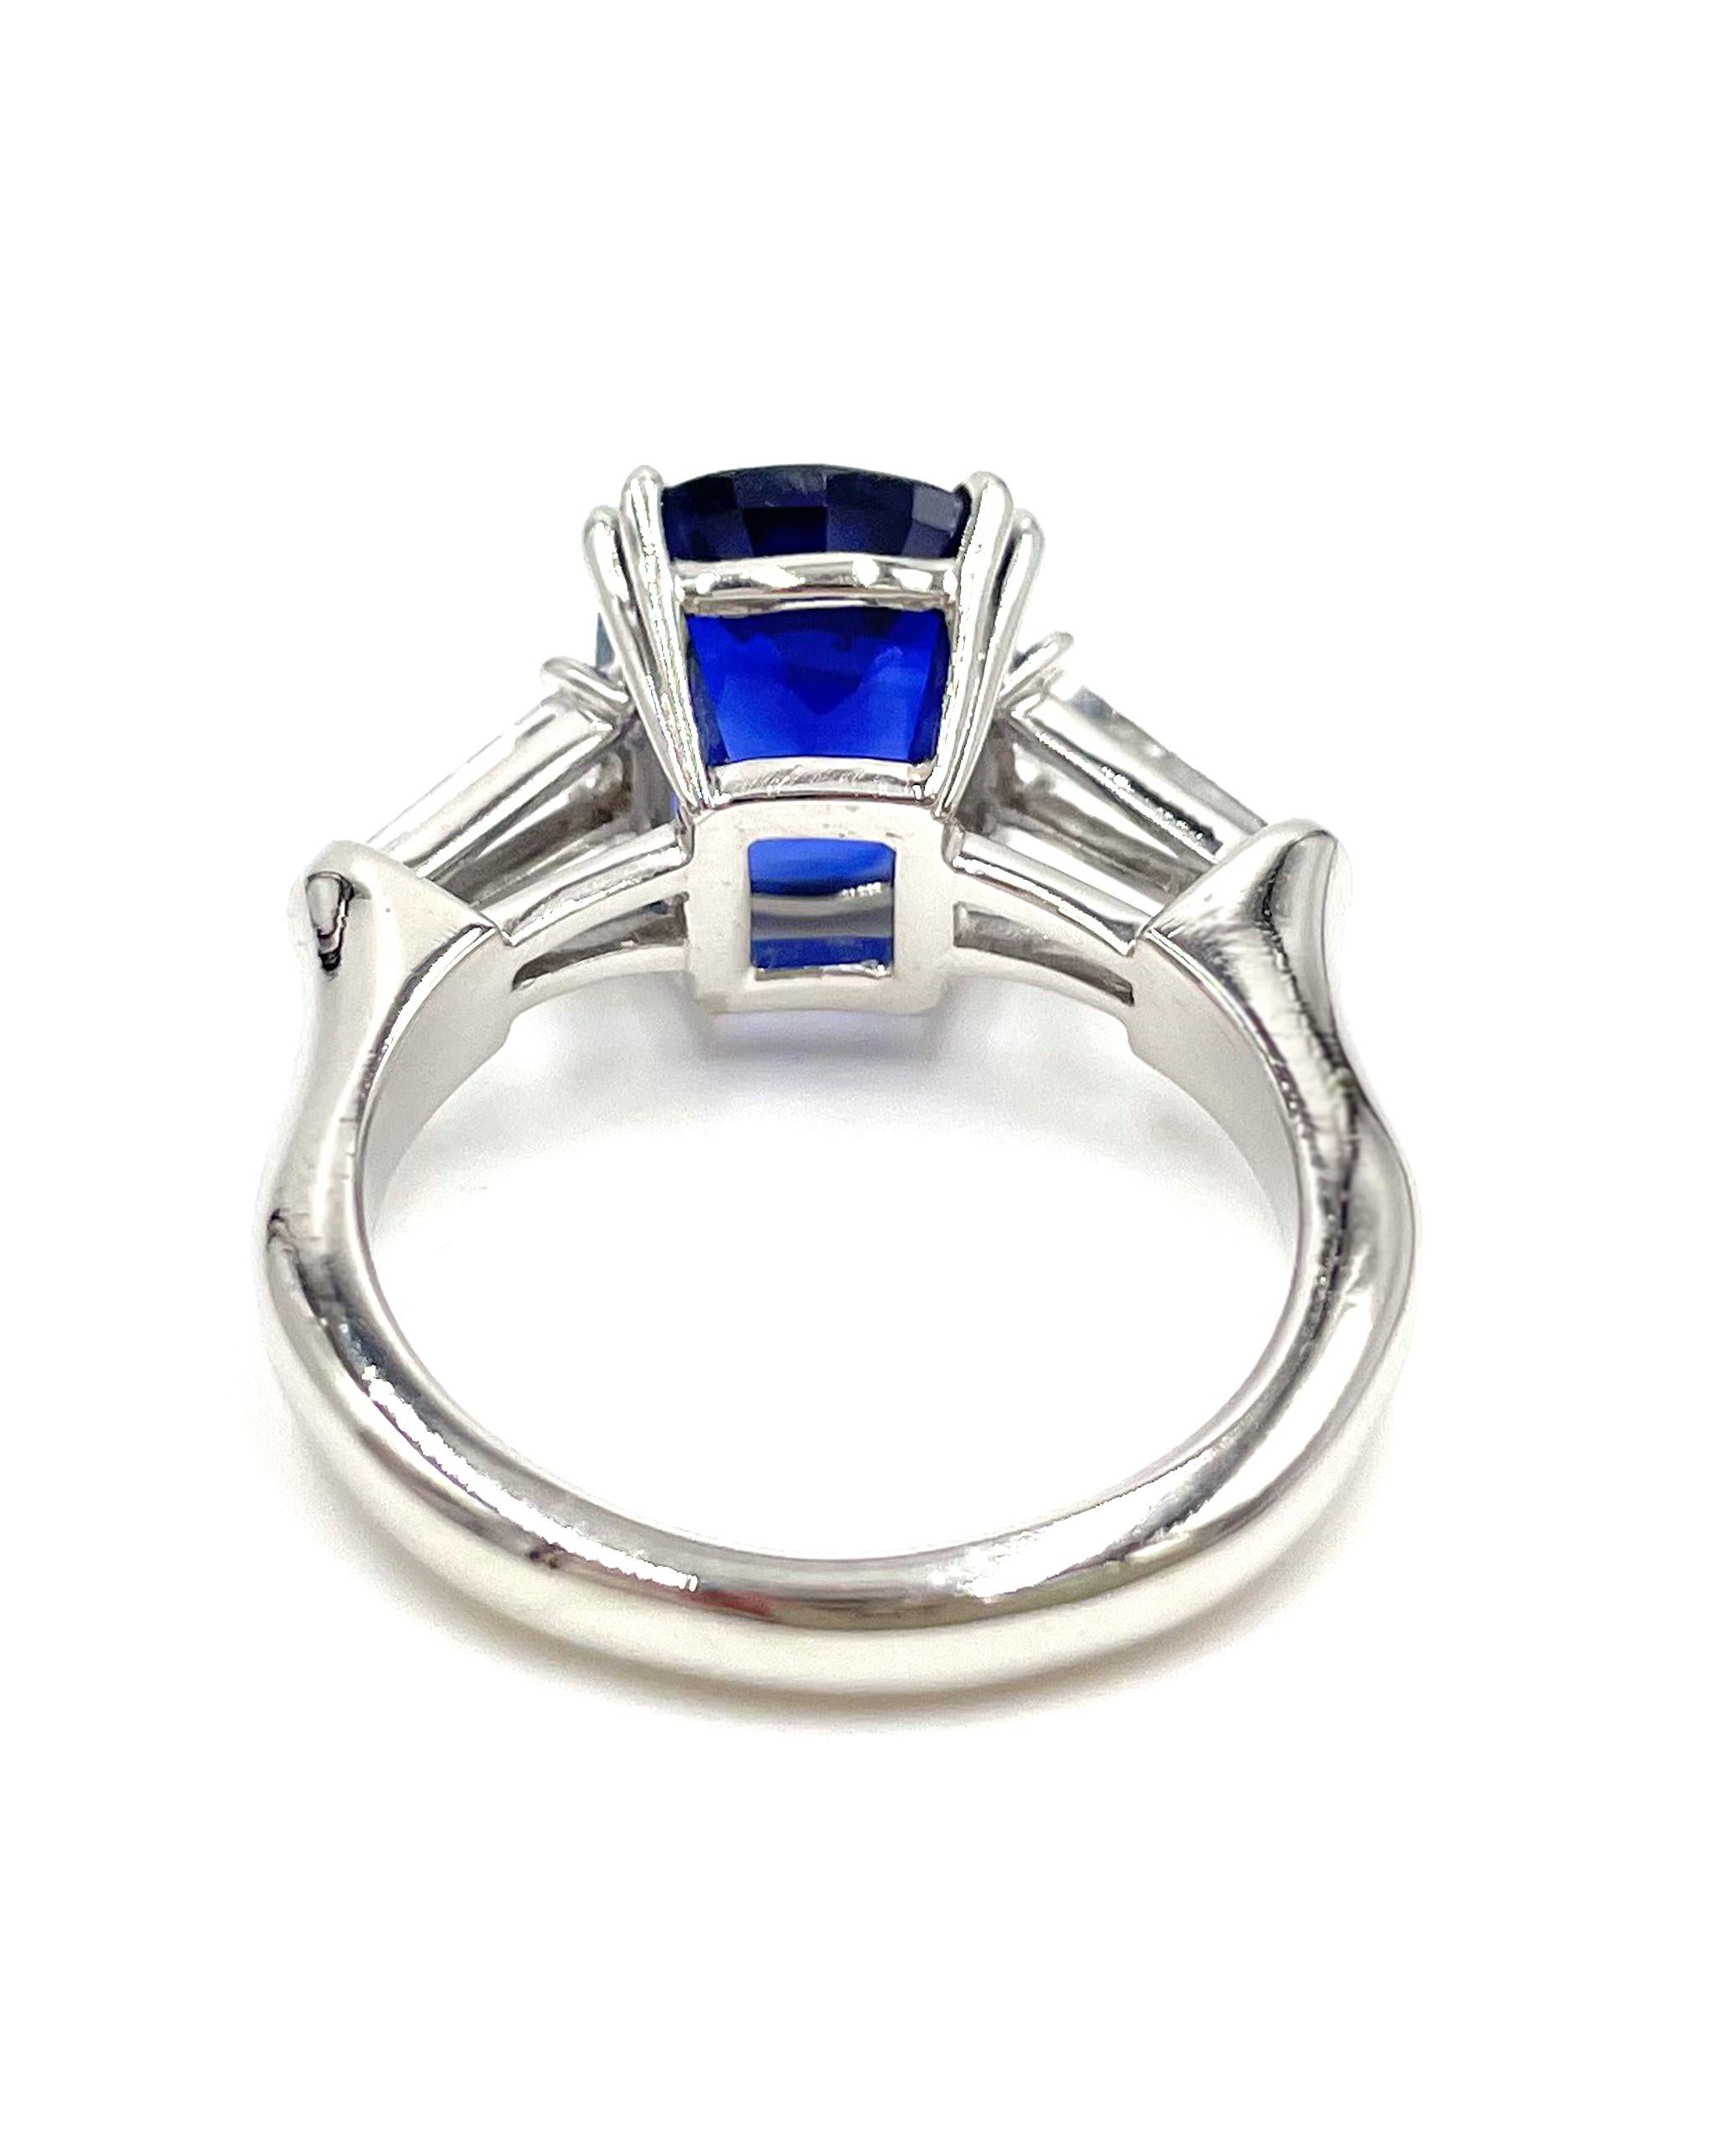 Cushion Cut Platinum Hand Made Ring with Baguettes and Ceylon Sapphire, Certified For Sale